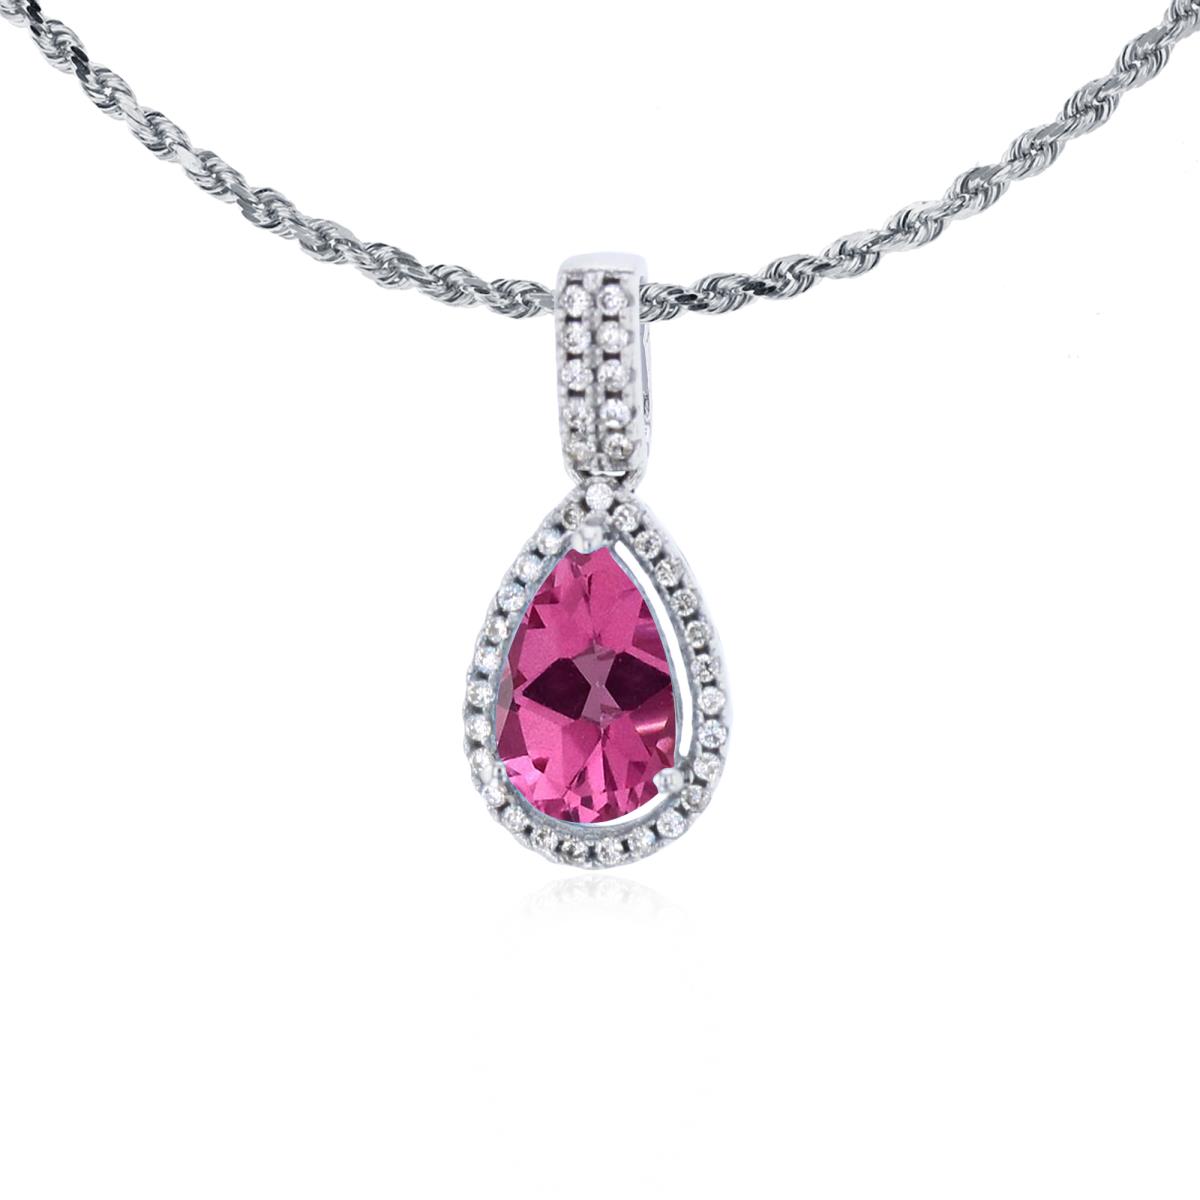 10K White Gold 8x5mm Pear Cut Pure Pink & 0.11 CTTW Diamond Halo 18" Rope Chain Necklace